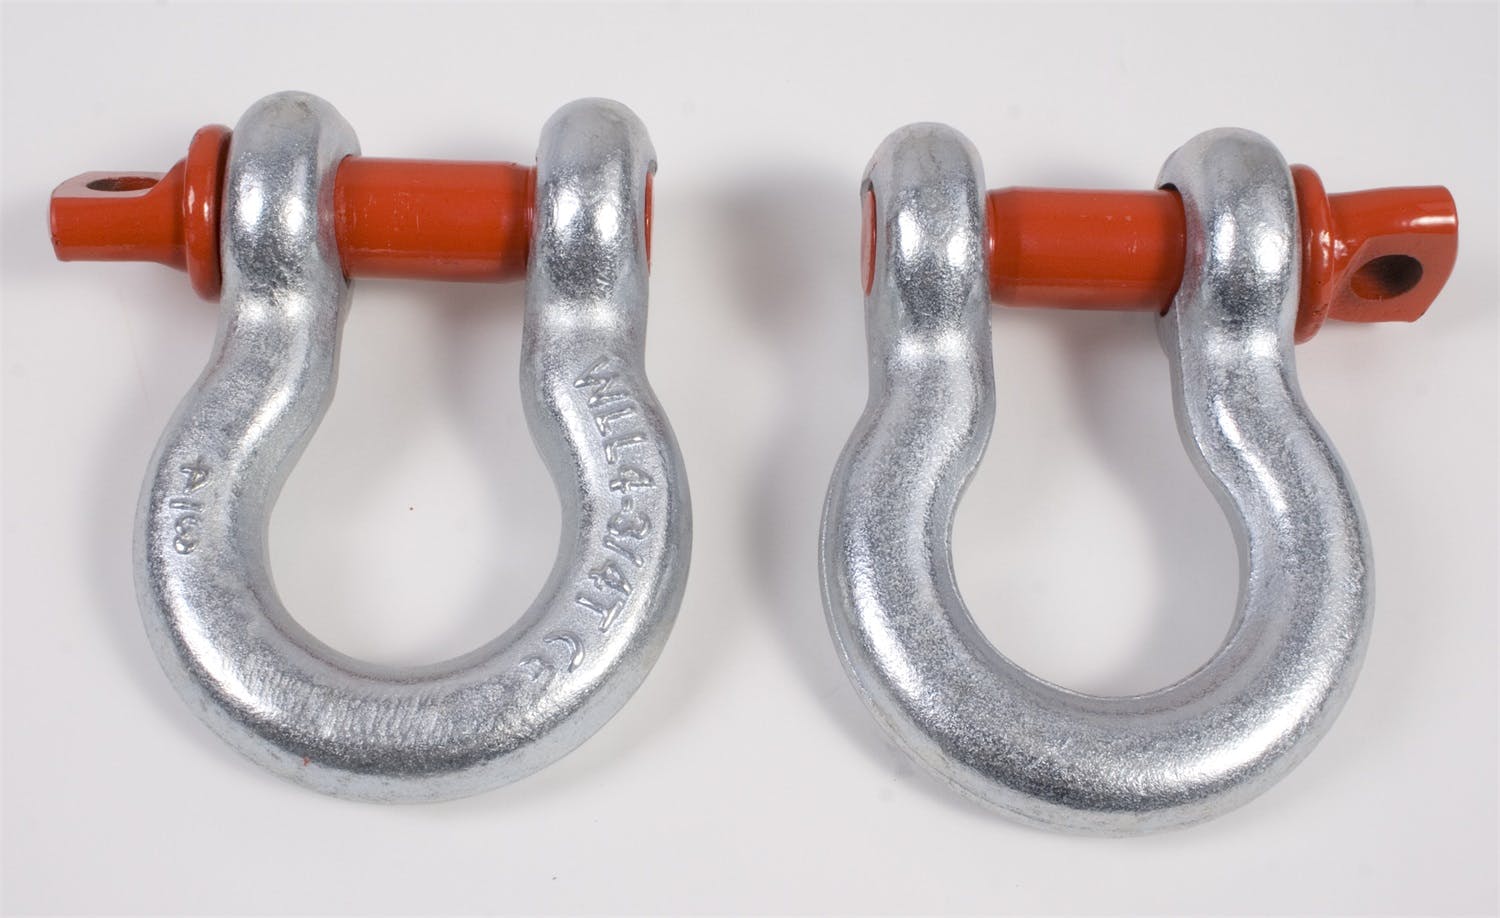 Rugged Ridge 11235.01 D-Ring Shackles; 3/4-Inch; Silver with Red pin; Steel; Pair